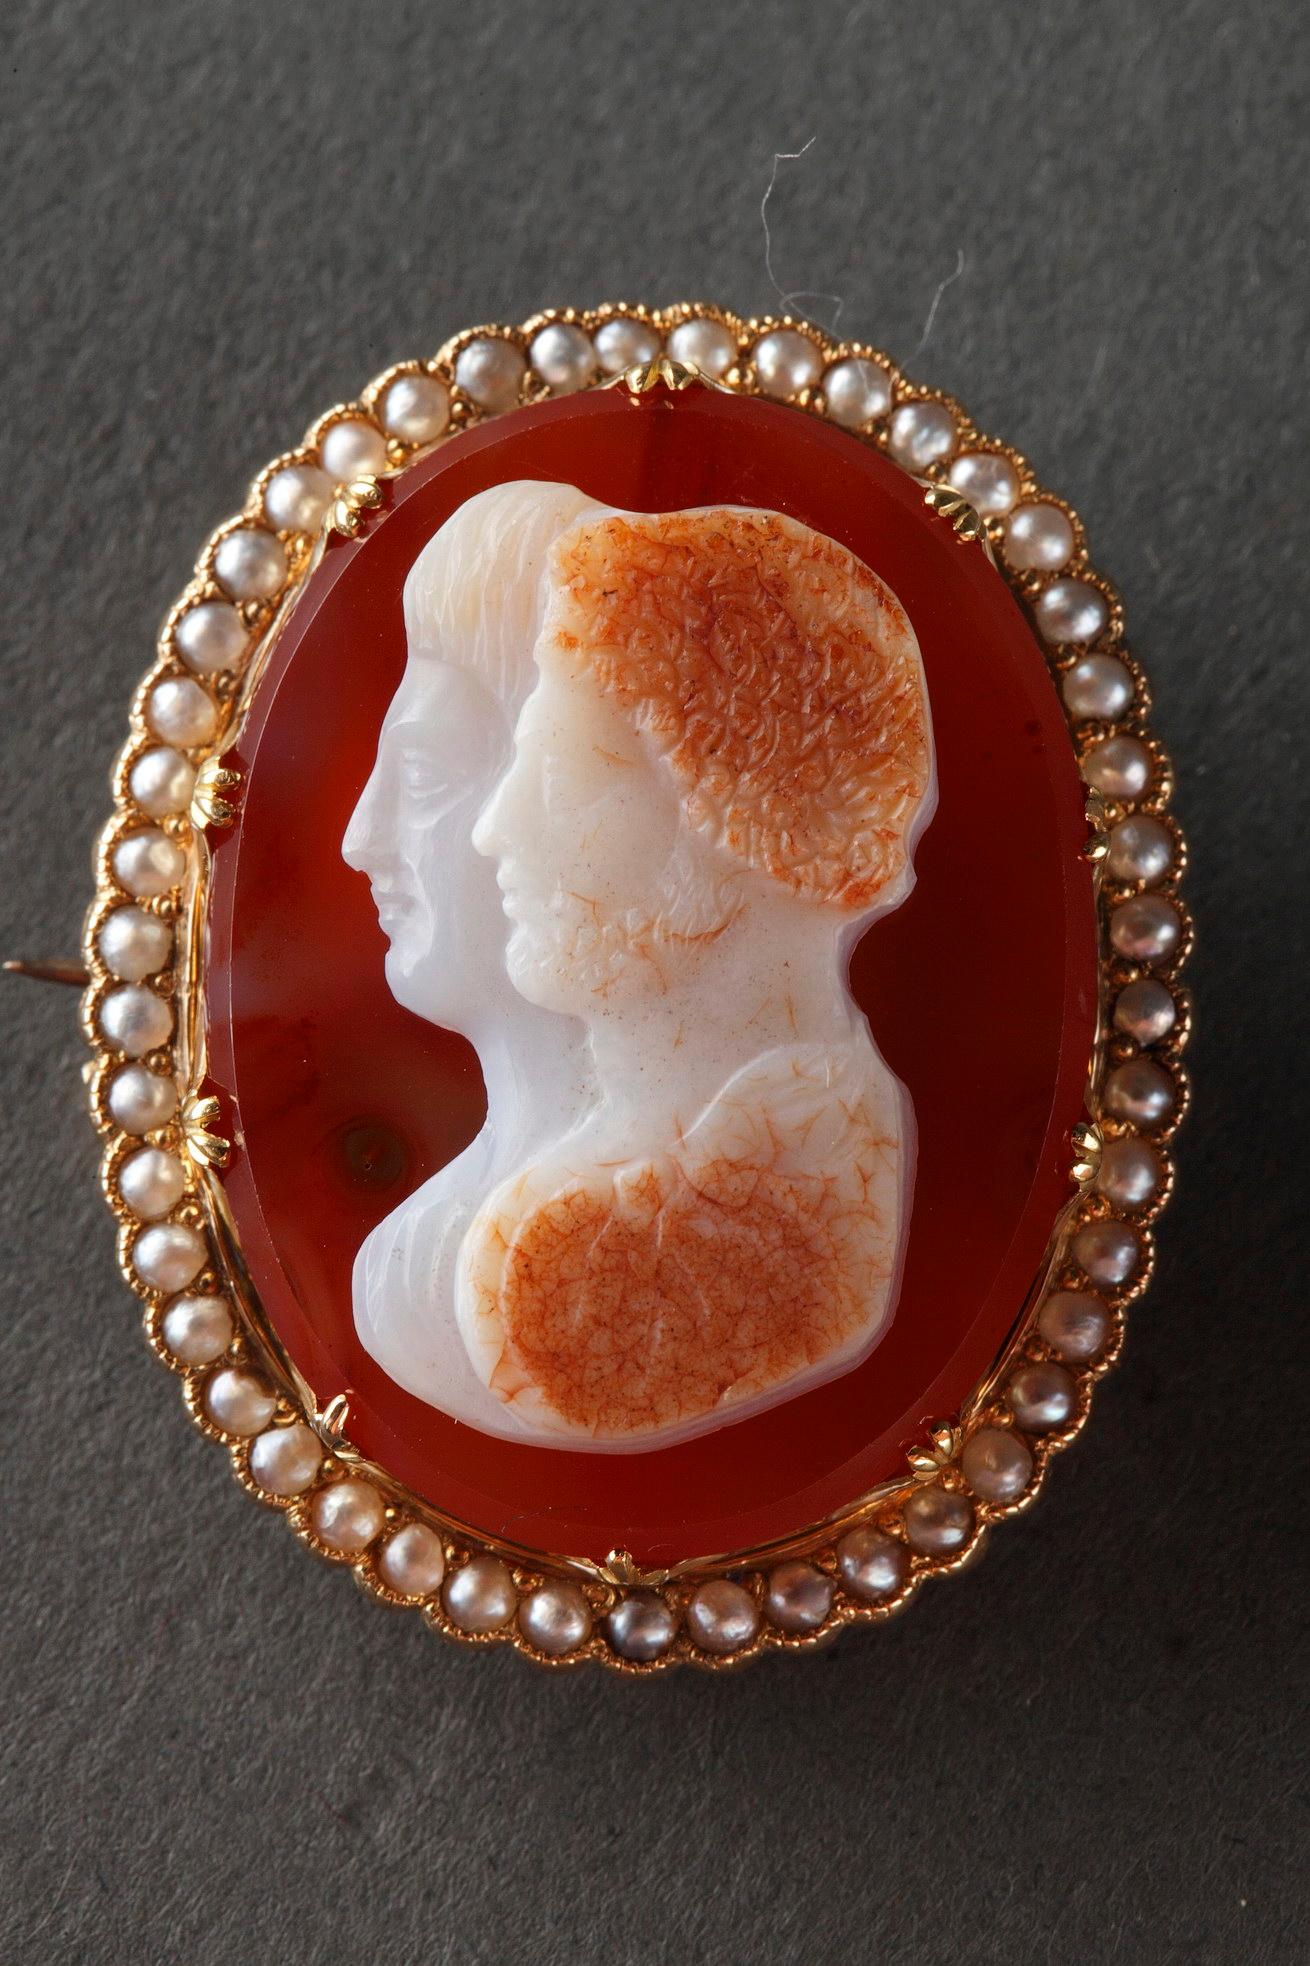 9th century agate cameo brooch, set in gold mounting. It shows two busts of Marcus Aurelius and Faustina in profile, raised in low relief on a dark red background. The gold mounting is set with a row of small pearls.
 
Dim: W: 1 in – D: ,4in – H: